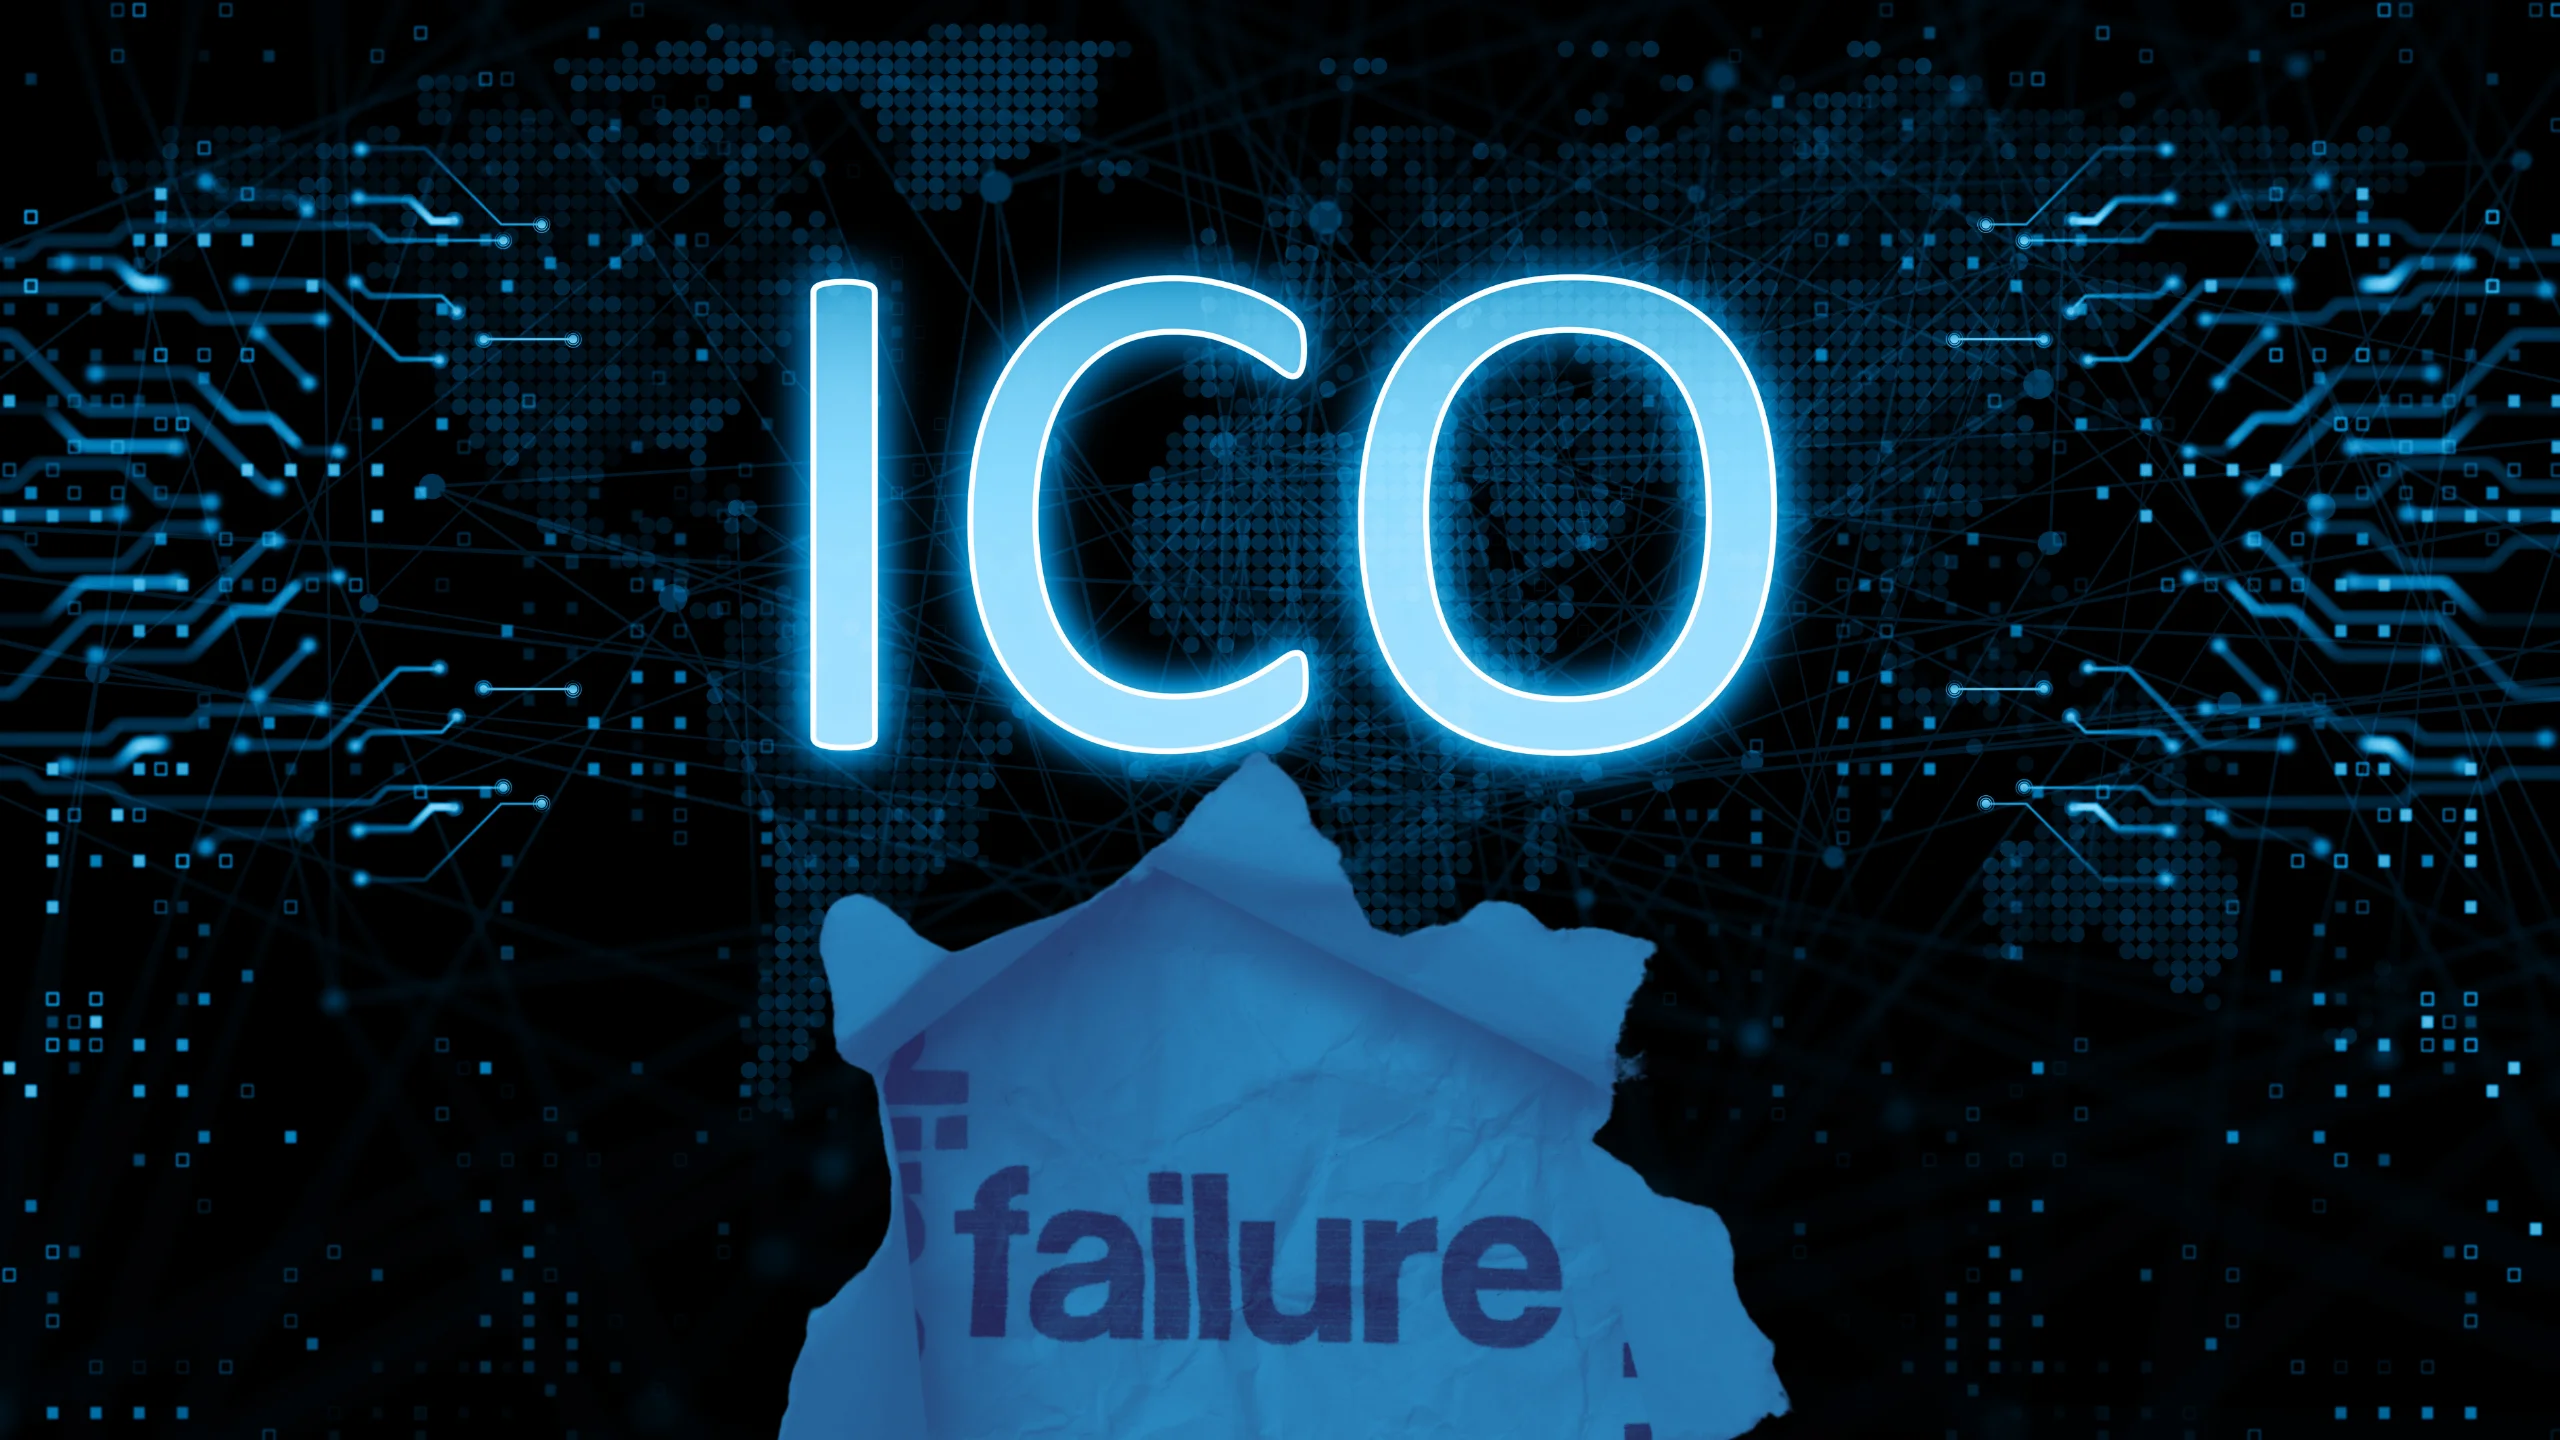 Illustration explaining the factors leading to ICO failure, including poor project planning, lack of market demand, inadequate funding, and regulatory issues. Highlights the common pitfalls and lessons learned from unsuccessful ICOs.